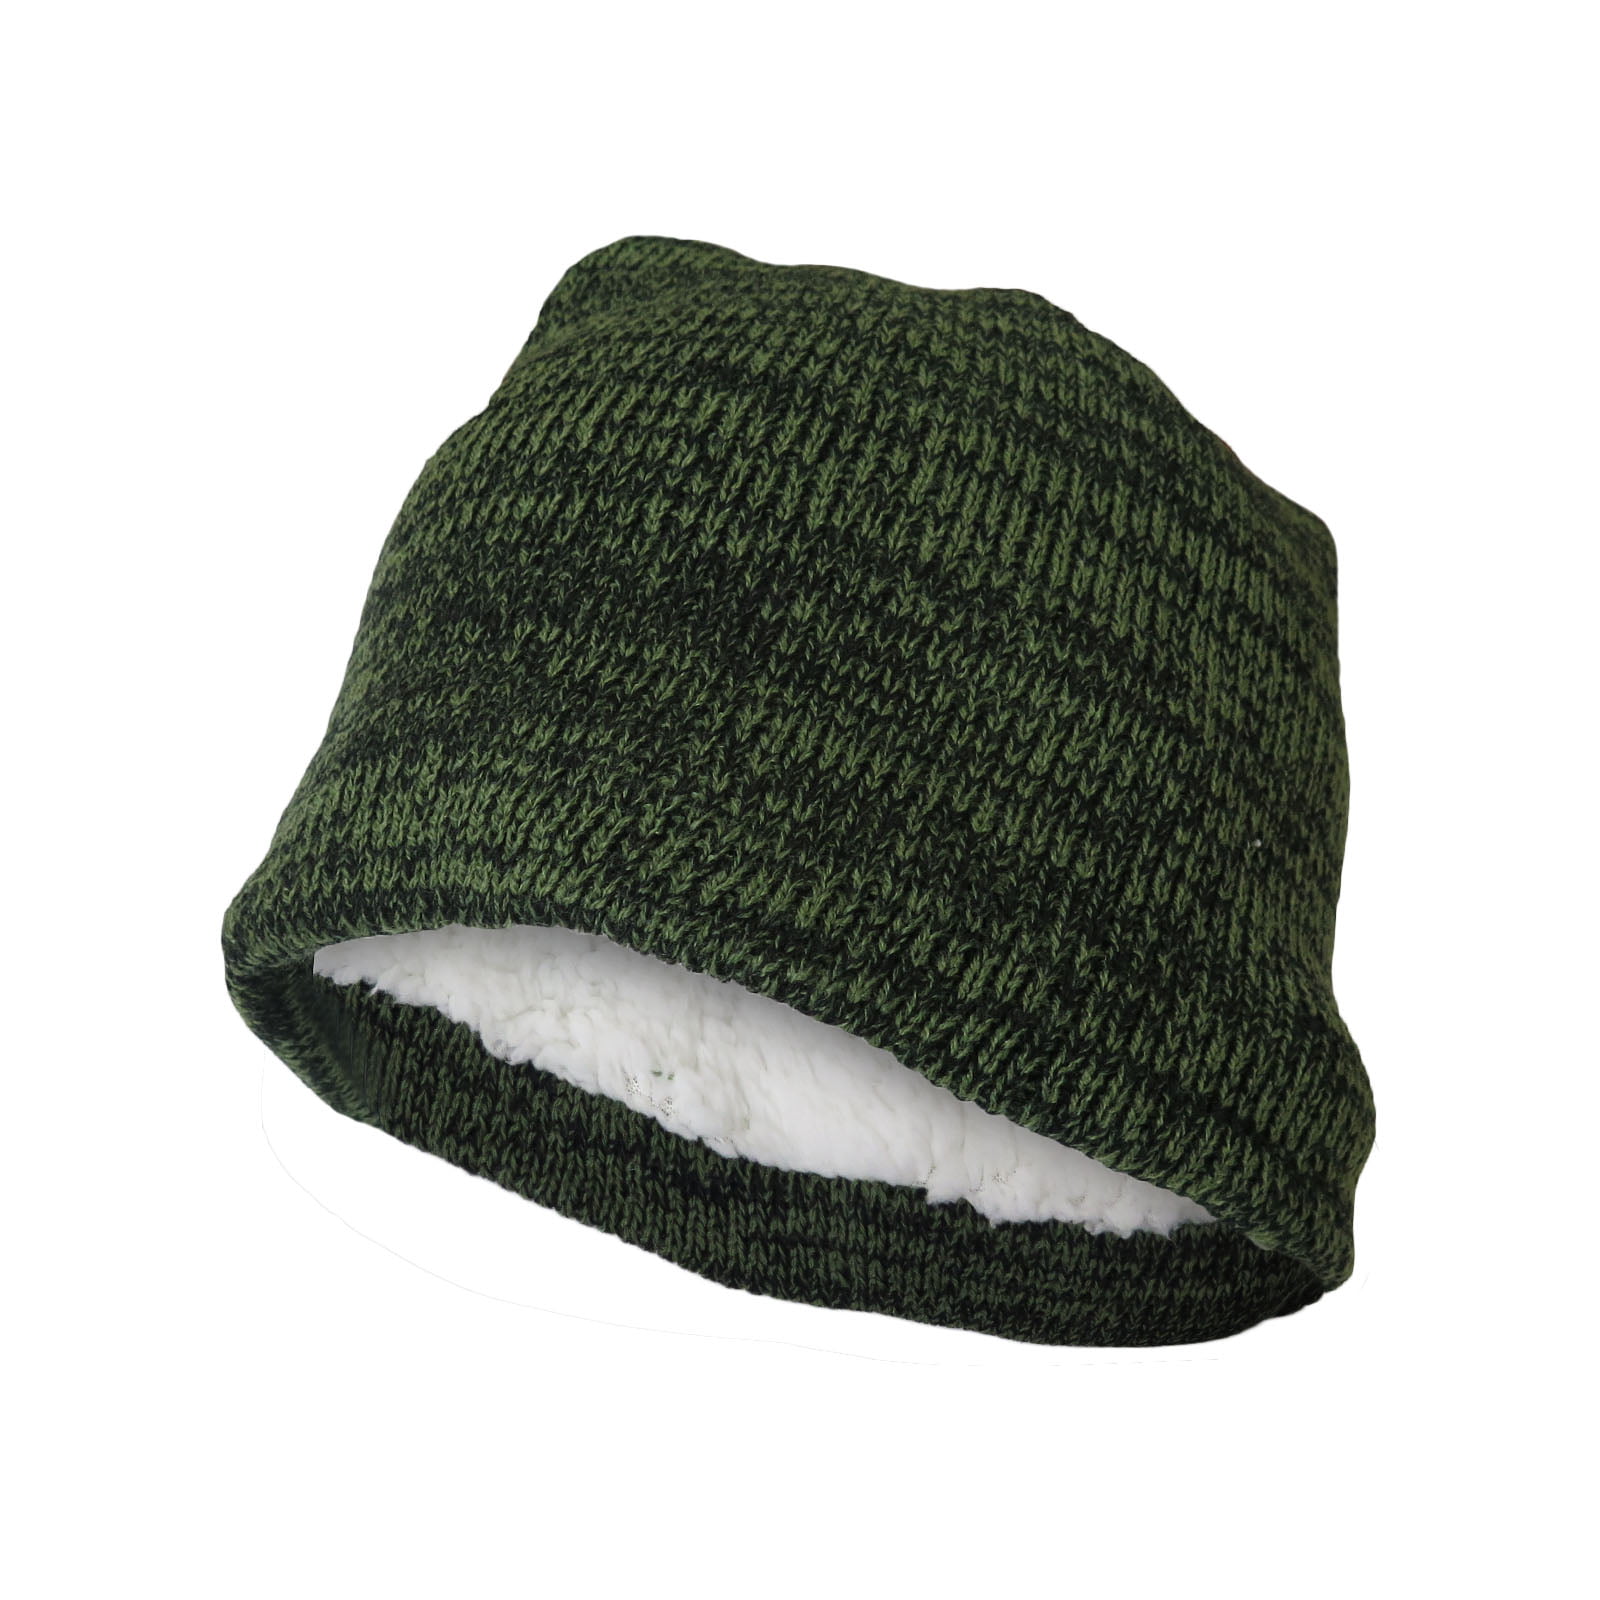 COLLJL-8 Men & Women World Down Syndrome Day Outdoor Stretch Knit Beanies Hat Soft Winter Skull Caps 